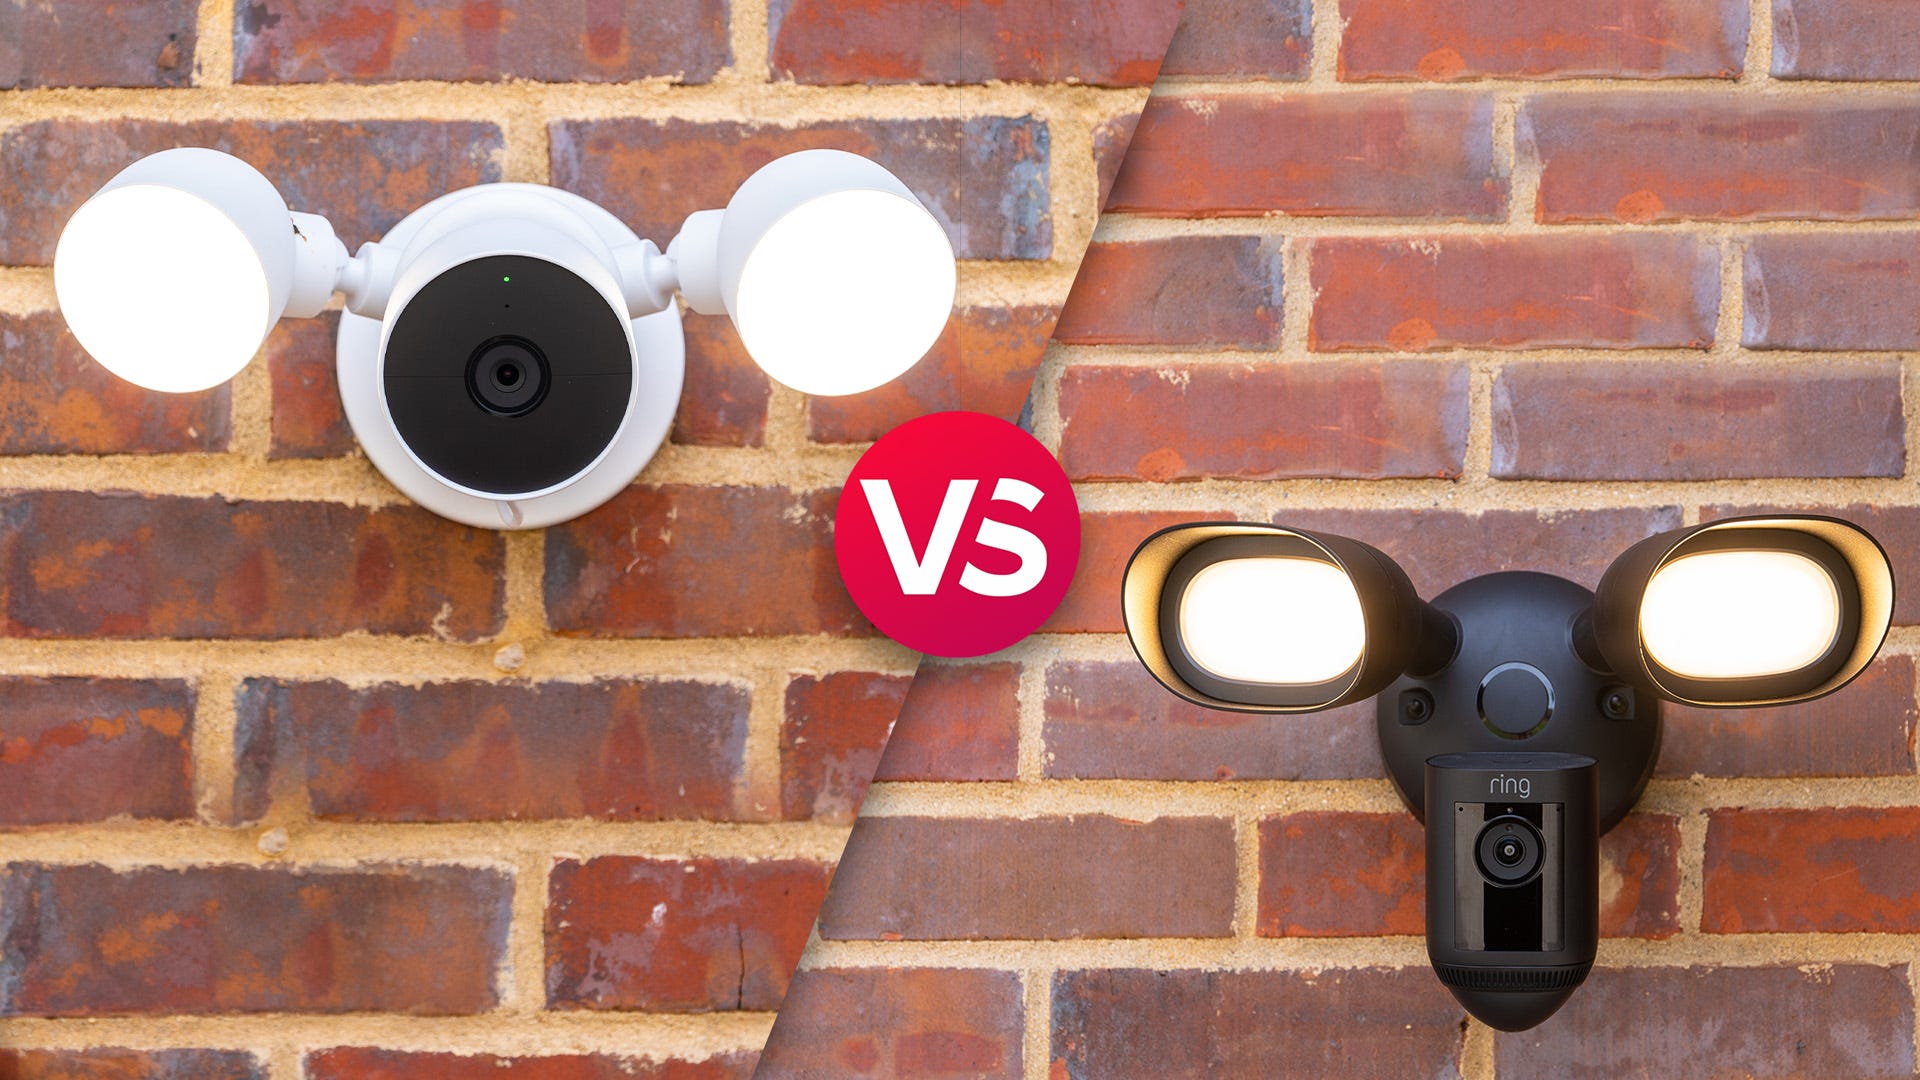 11 things to know about the new Nest Cam with floodlight